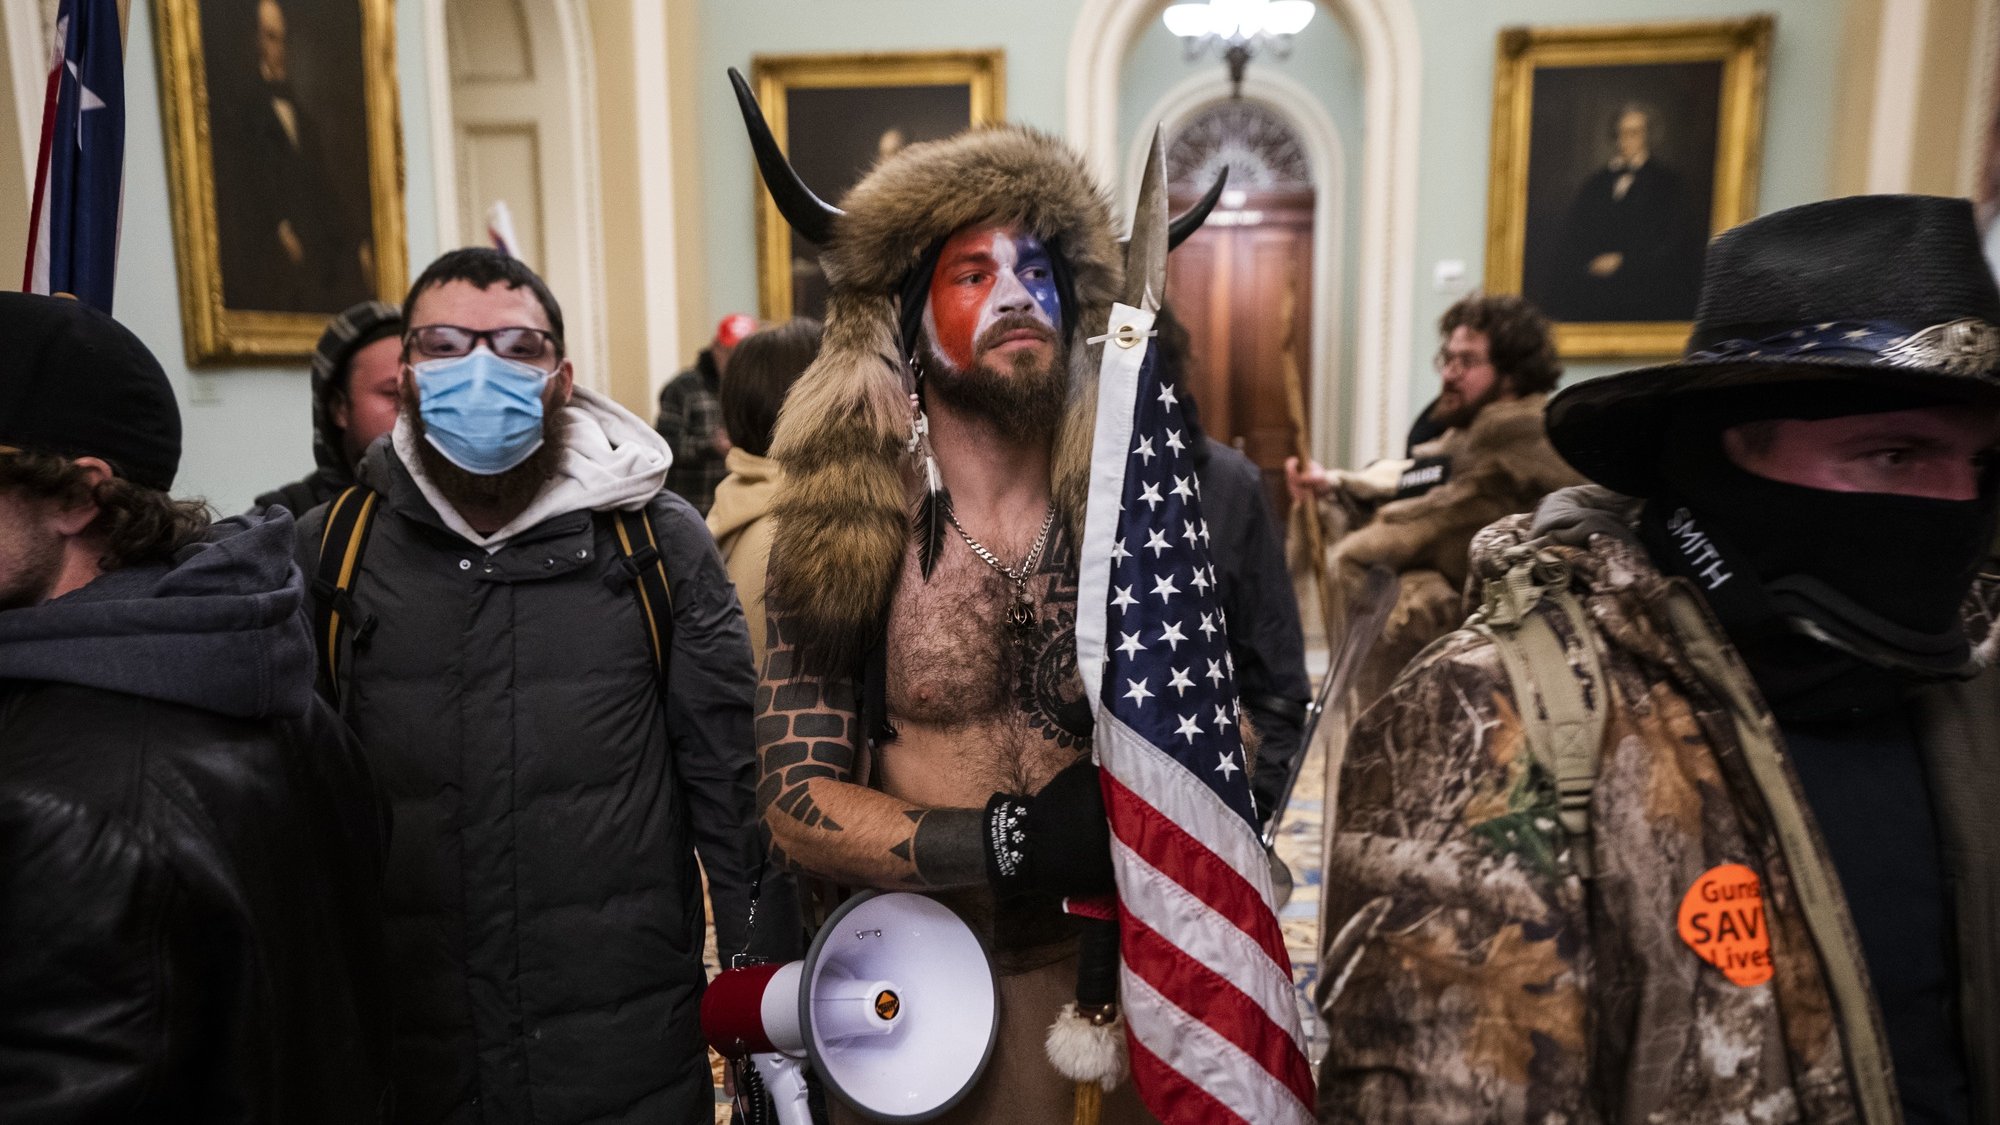 epa08923449 Supporters of US President Donald J. Trump gather outside of the Senate chamber after they breached the US Capitol security in Washington, DC, USA, 06 January 2021. Protesters stormed the US Capitol where the Electoral College vote certification for President-elect Joe Biden took place.  EPA/JIM LO SCALZO